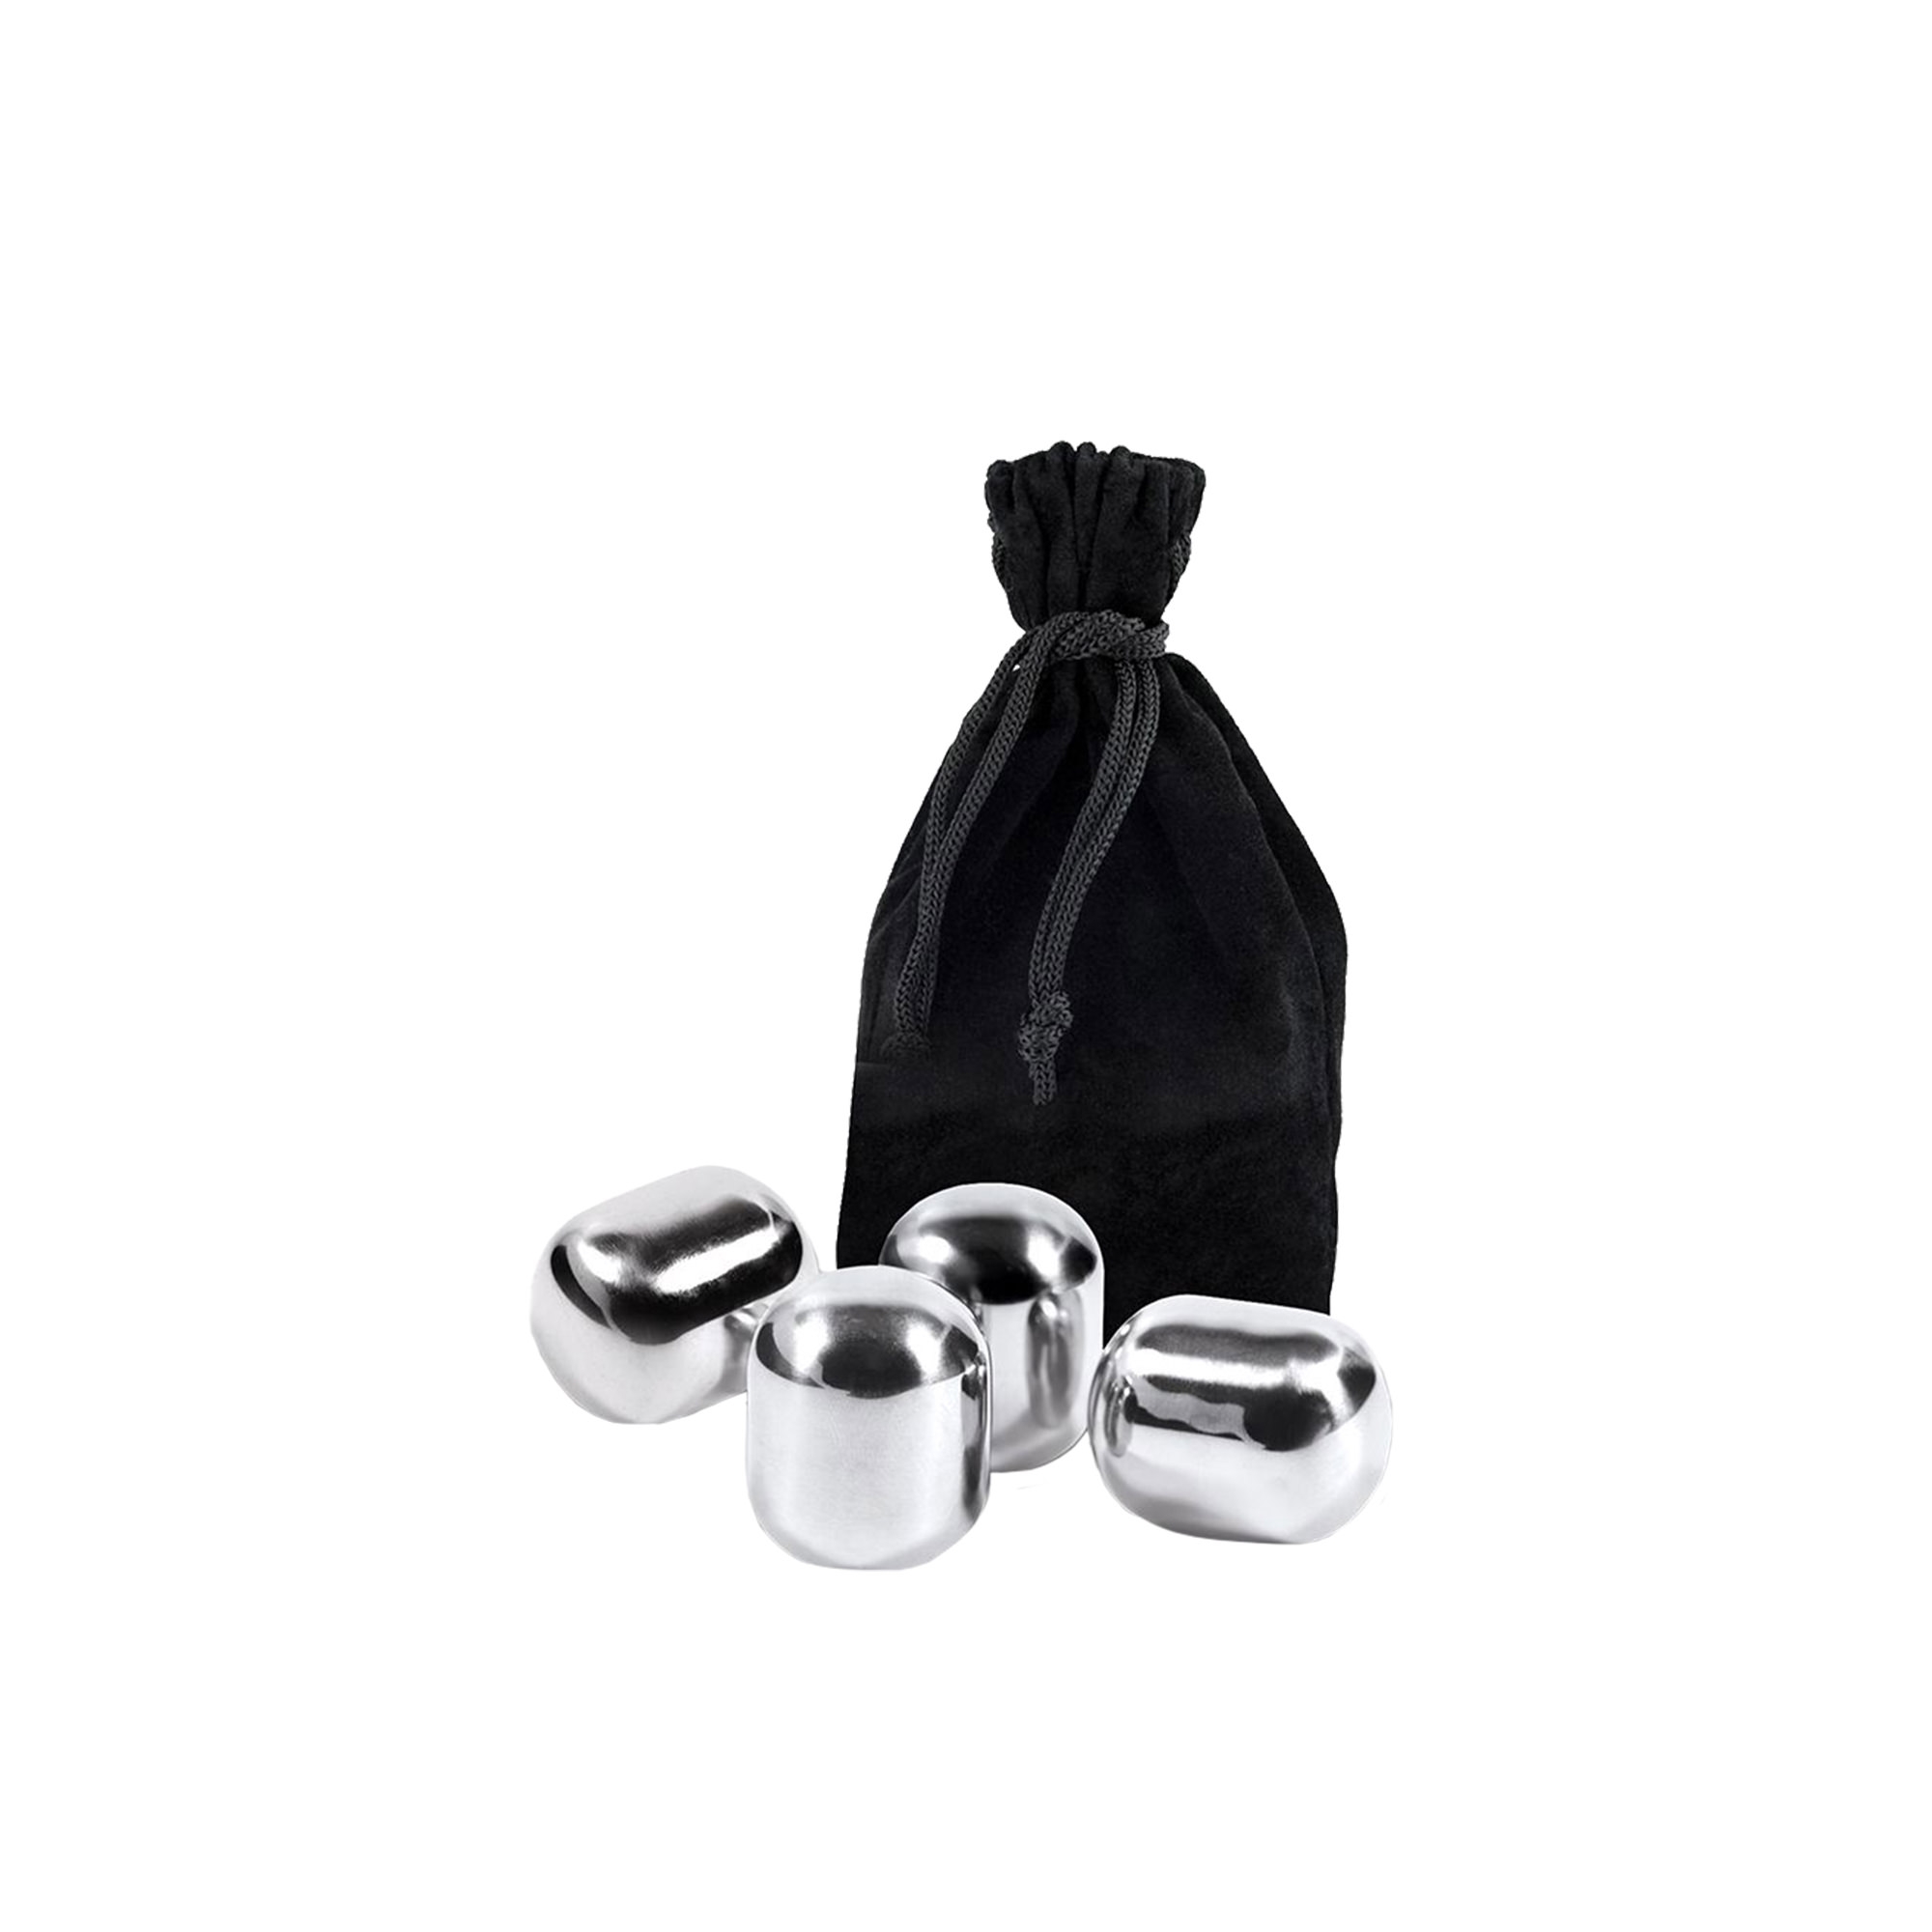 Bartender Stainless Steel Wine Pearls with Bag Set of 4 Image 1